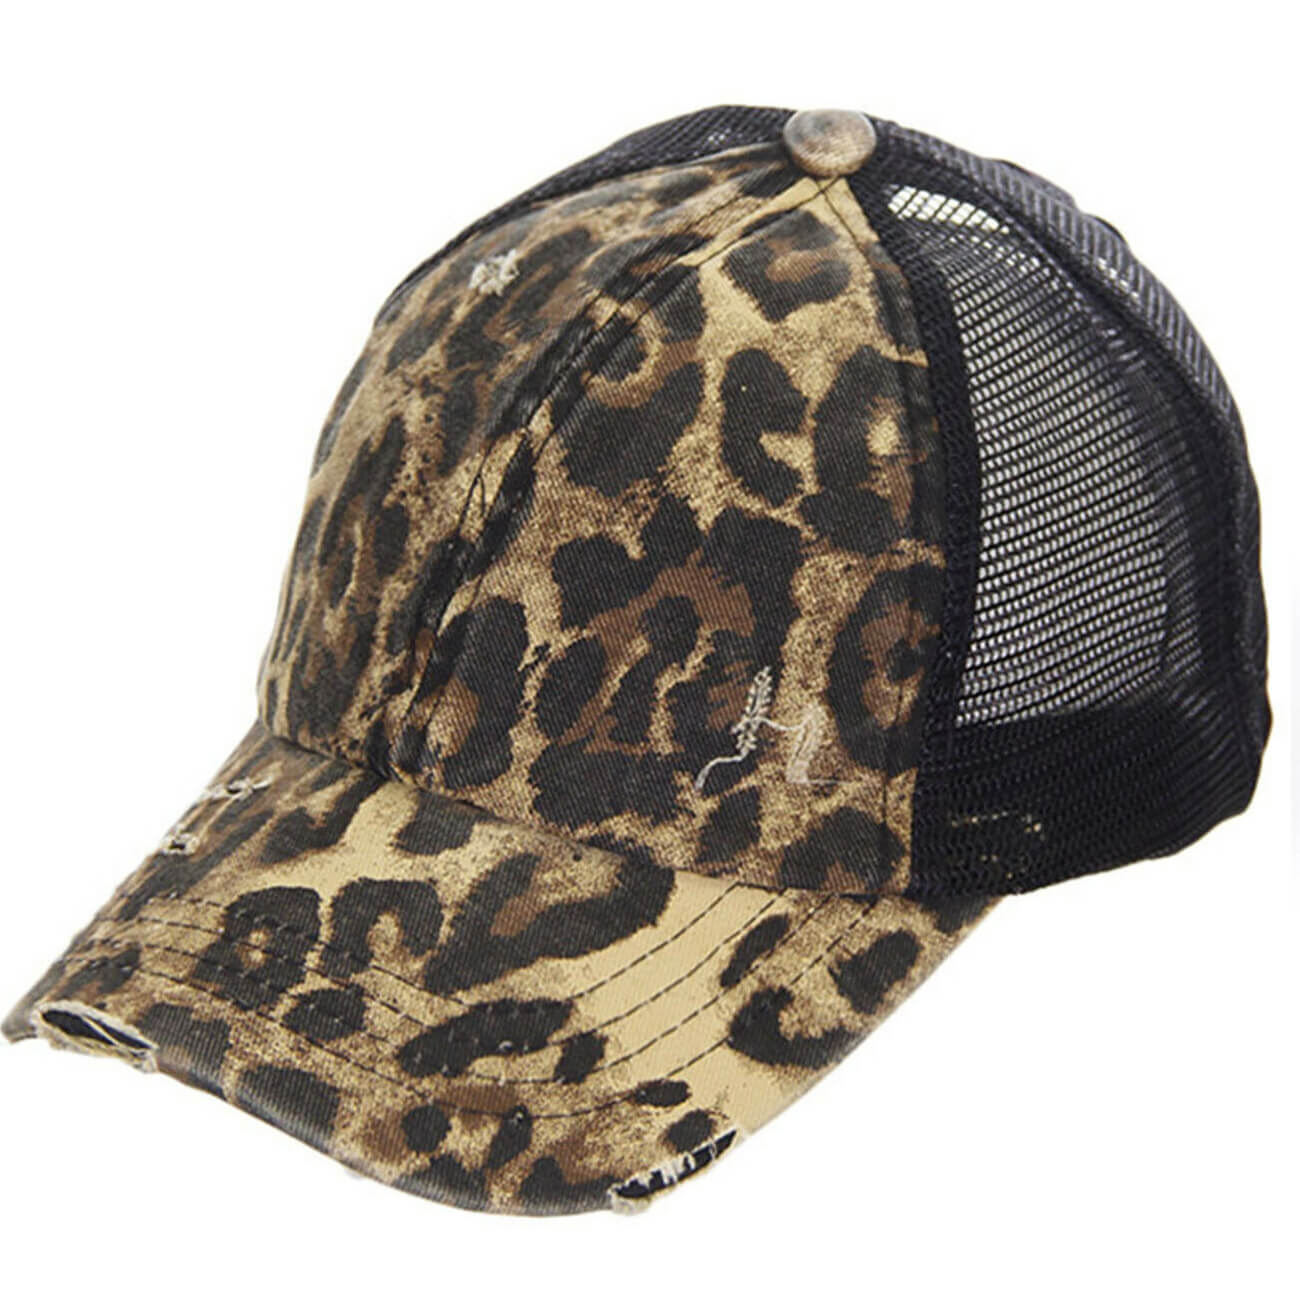 Women's CC Criss-Cross Back Hat with Side Patch (Multiple Color Options)